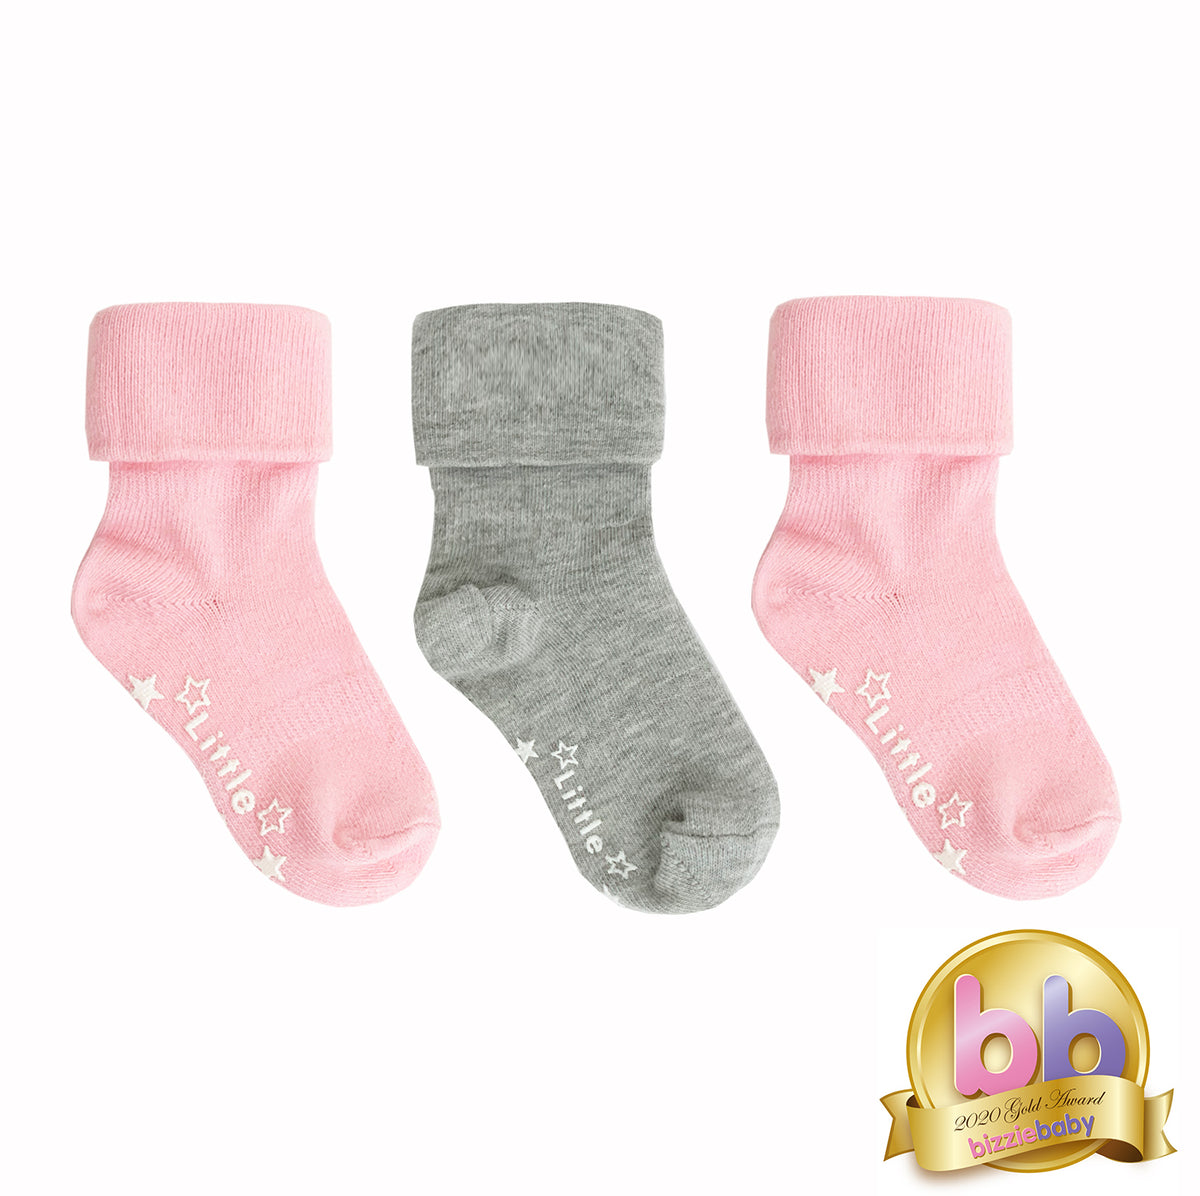 Non-Slip Stay On Baby and Toddler Socks - 3 Pack in Fairy Tale Pink & Grey